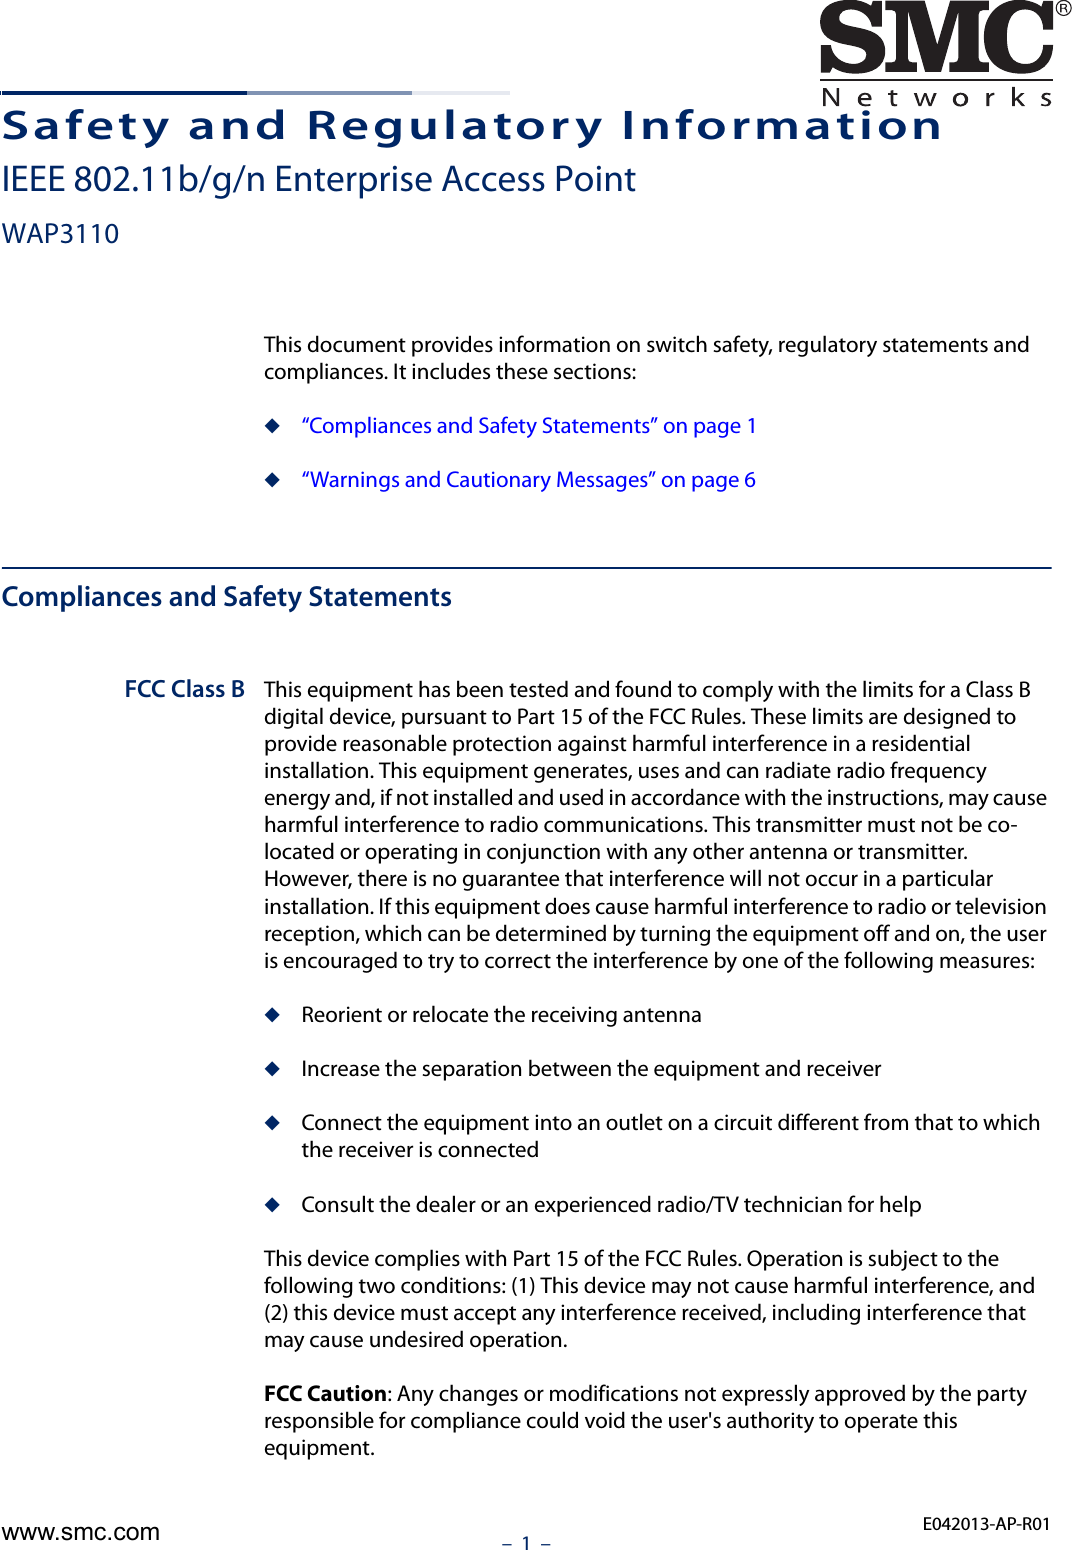 –  1  –Safety and Regulatory InformationIEEE 802.11b/g/n Enterprise Access PointWAP3110This document provides information on switch safety, regulatory statements and compliances. It includes these sections:◆“Compliances and Safety Statements” on page 1◆“Warnings and Cautionary Messages” on page 6Compliances and Safety StatementsFCC Class B This equipment has been tested and found to comply with the limits for a Class B digital device, pursuant to Part 15 of the FCC Rules. These limits are designed to provide reasonable protection against harmful interference in a residential installation. This equipment generates, uses and can radiate radio frequency energy and, if not installed and used in accordance with the instructions, may cause harmful interference to radio communications. This transmitter must not be co-located or operating in conjunction with any other antenna or transmitter. However, there is no guarantee that interference will not occur in a particular installation. If this equipment does cause harmful interference to radio or television reception, which can be determined by turning the equipment off and on, the user is encouraged to try to correct the interference by one of the following measures:◆Reorient or relocate the receiving antenna◆Increase the separation between the equipment and receiver◆Connect the equipment into an outlet on a circuit different from that to which the receiver is connected◆Consult the dealer or an experienced radio/TV technician for helpThis device complies with Part 15 of the FCC Rules. Operation is subject to the following two conditions: (1) This device may not cause harmful interference, and (2) this device must accept any interference received, including interference that may cause undesired operation.FCC Caution: Any changes or modifications not expressly approved by the party responsible for compliance could void the user&apos;s authority to operate this equipment. E042013-AP-R01www.smc.com